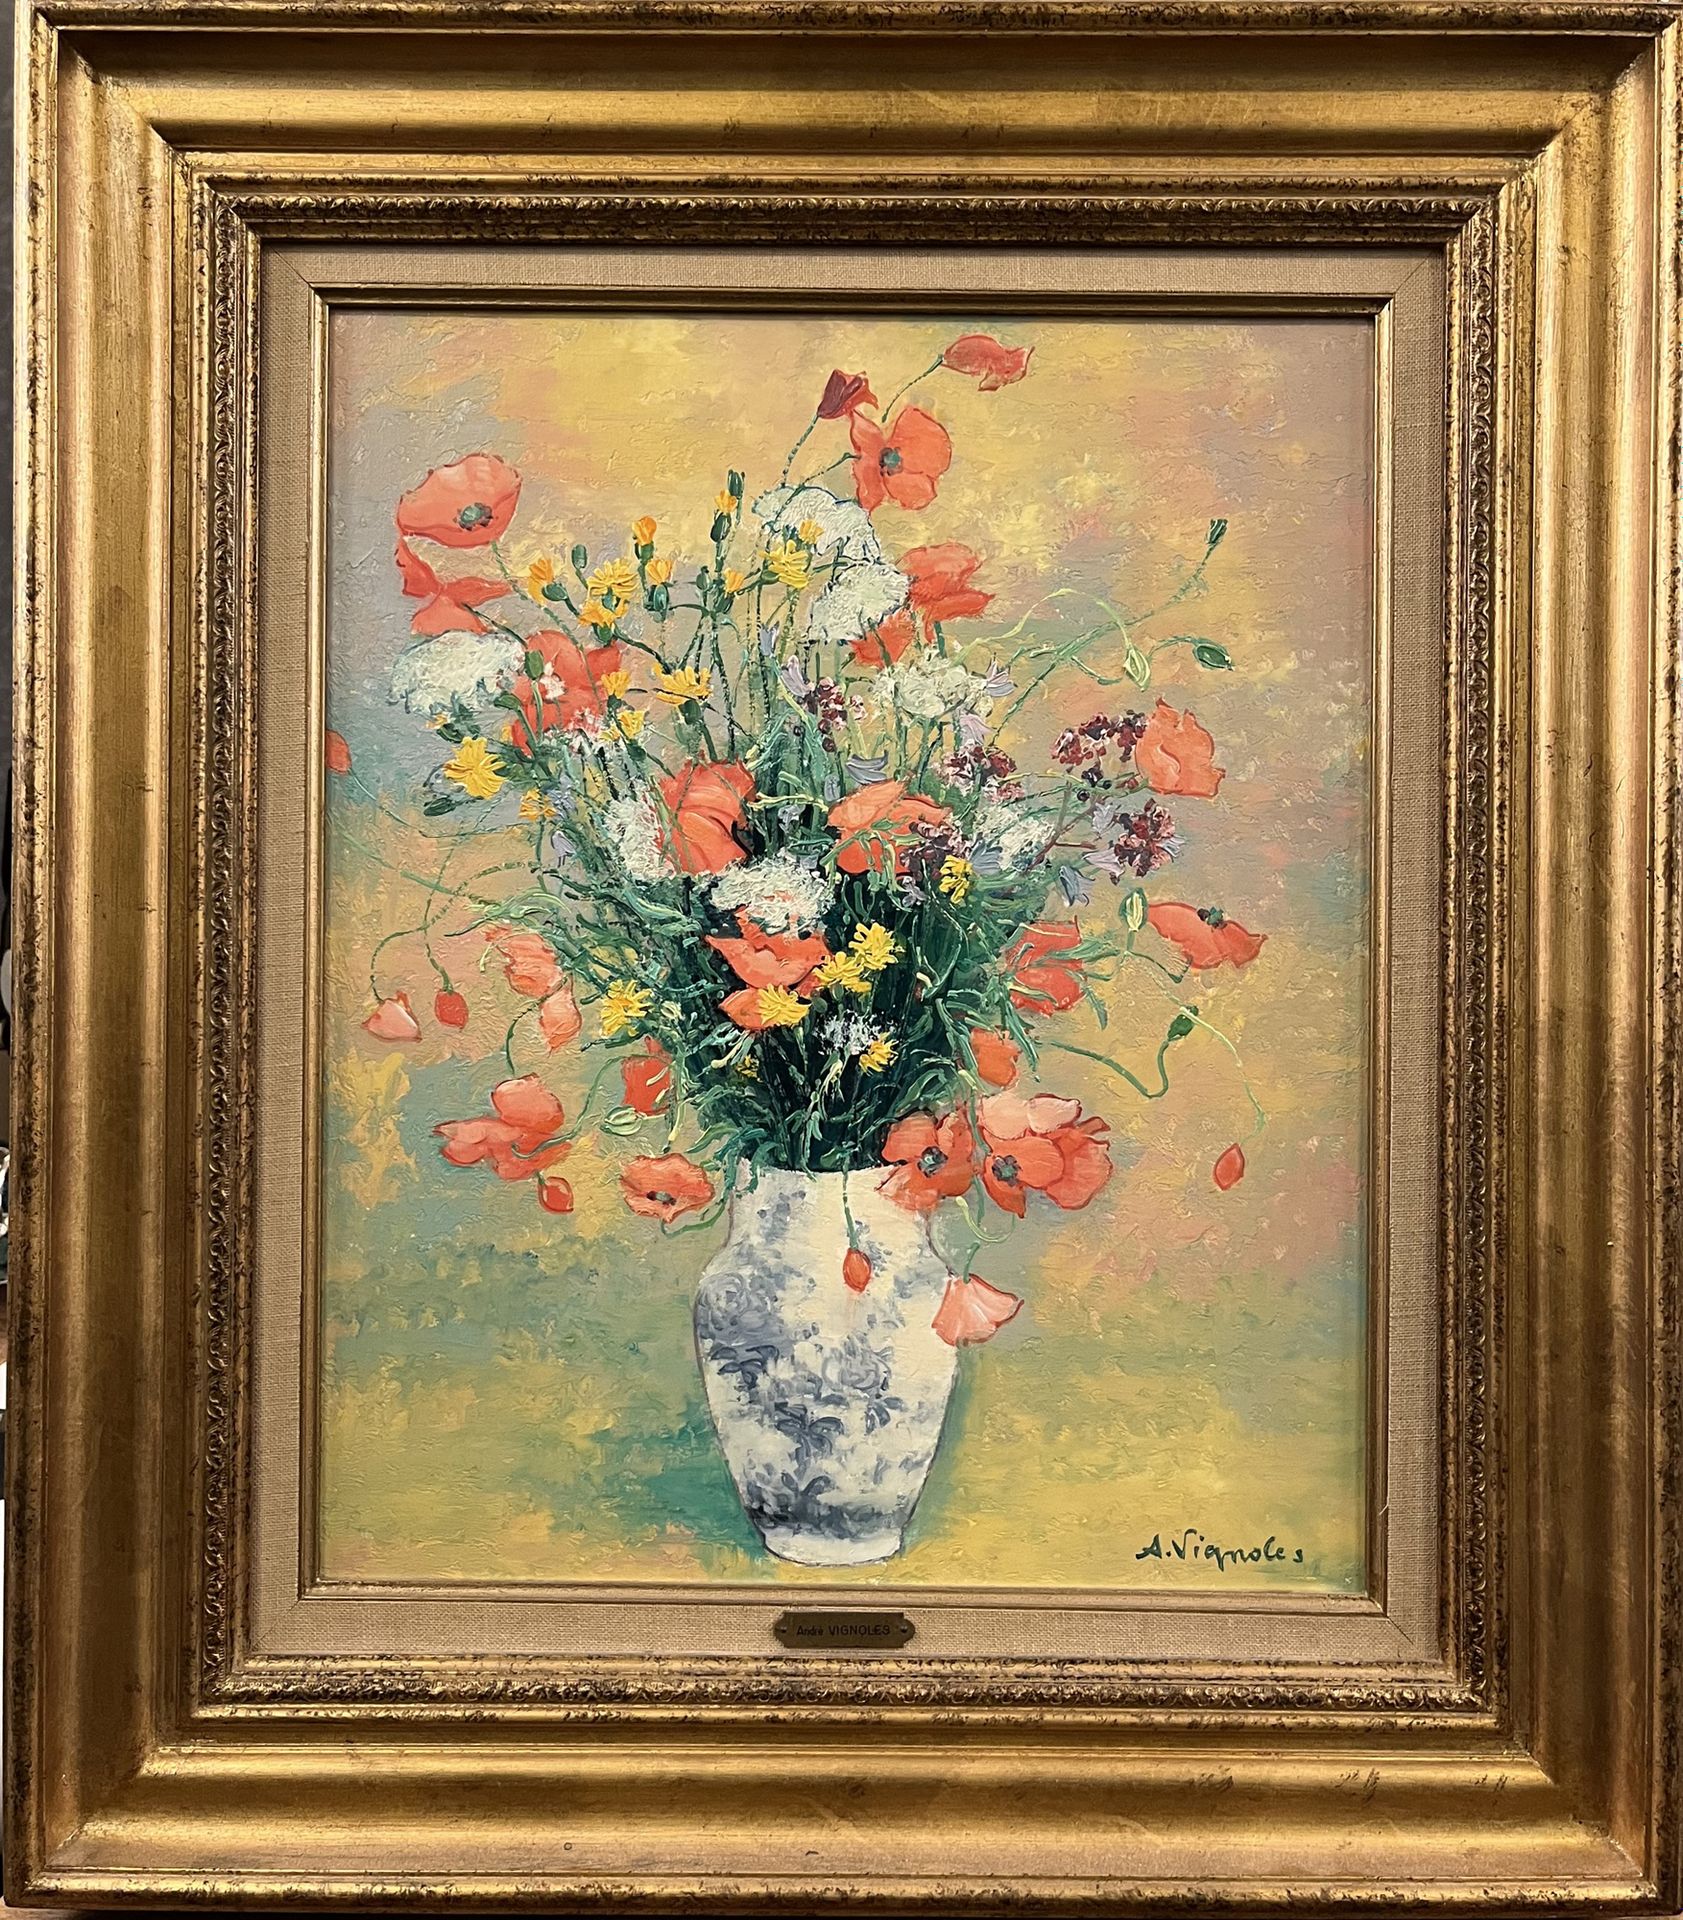 Null ANDRE VIGNOLES (1920-2017)

"Poppies in a porcelain vase". 

Oil on canvas &hellip;